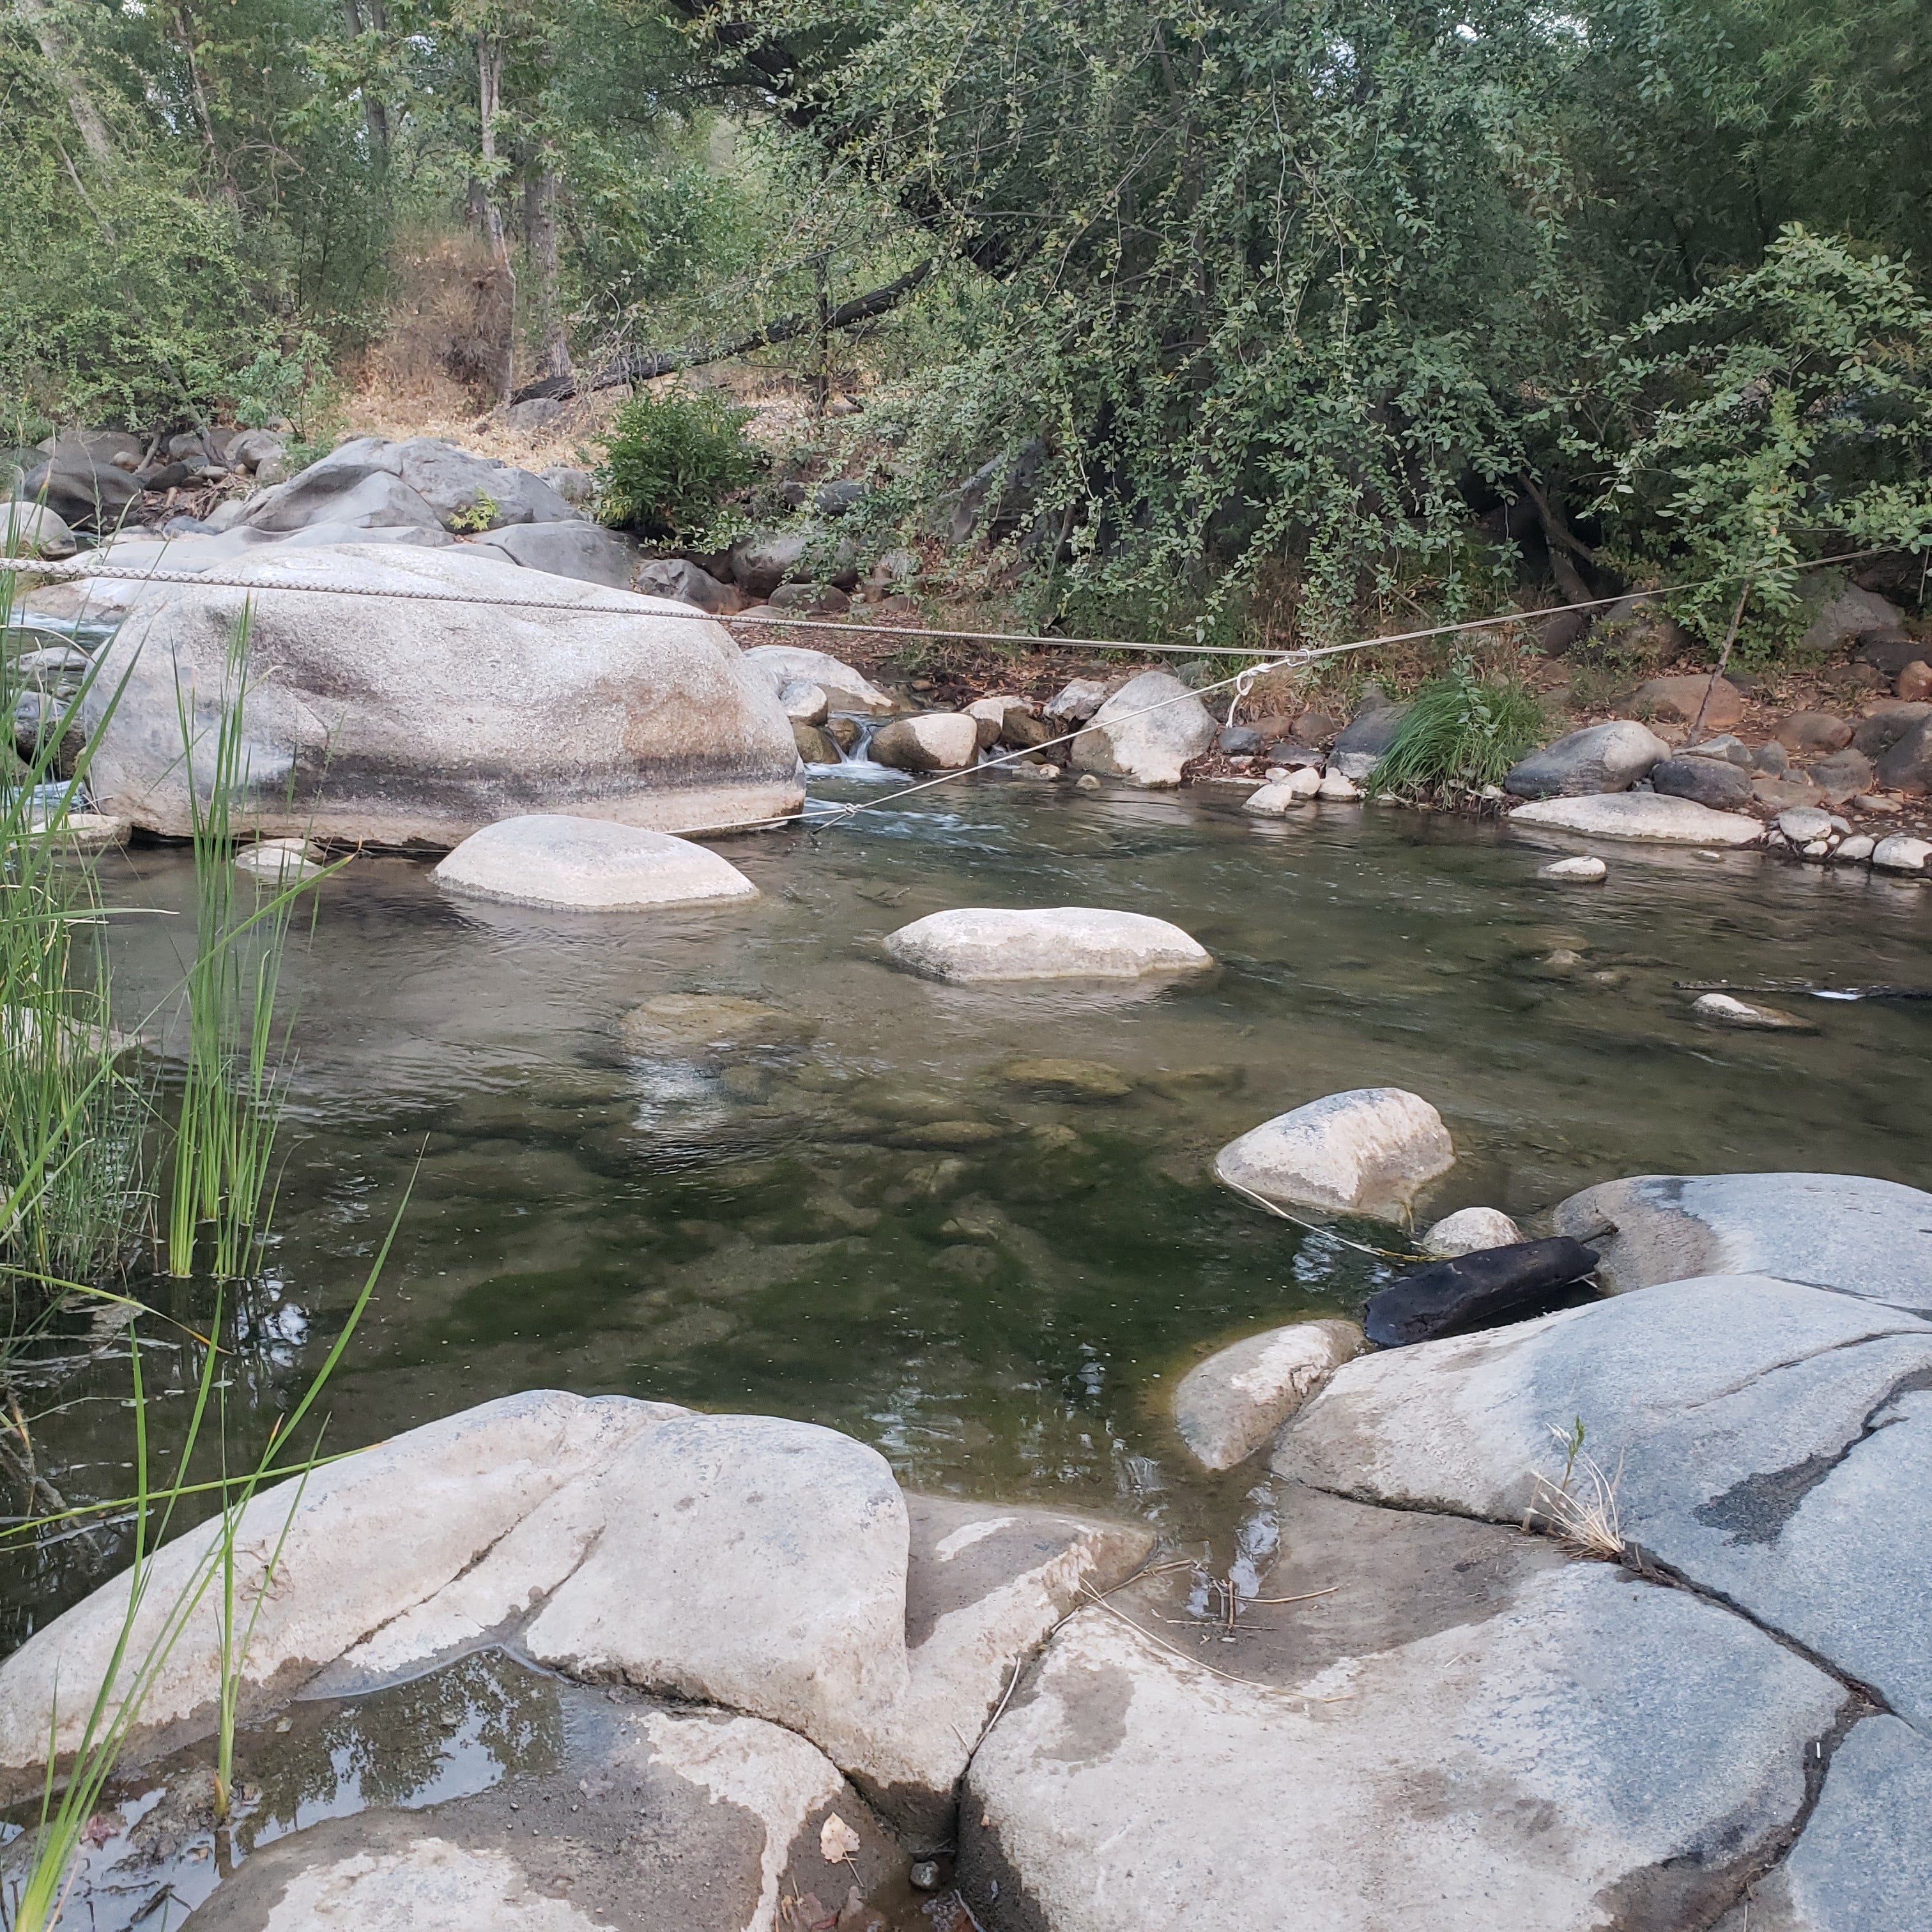 Camper submitted image from Camp or Glamp along the Tule River next to the Giant Sequoia National Monument - 1